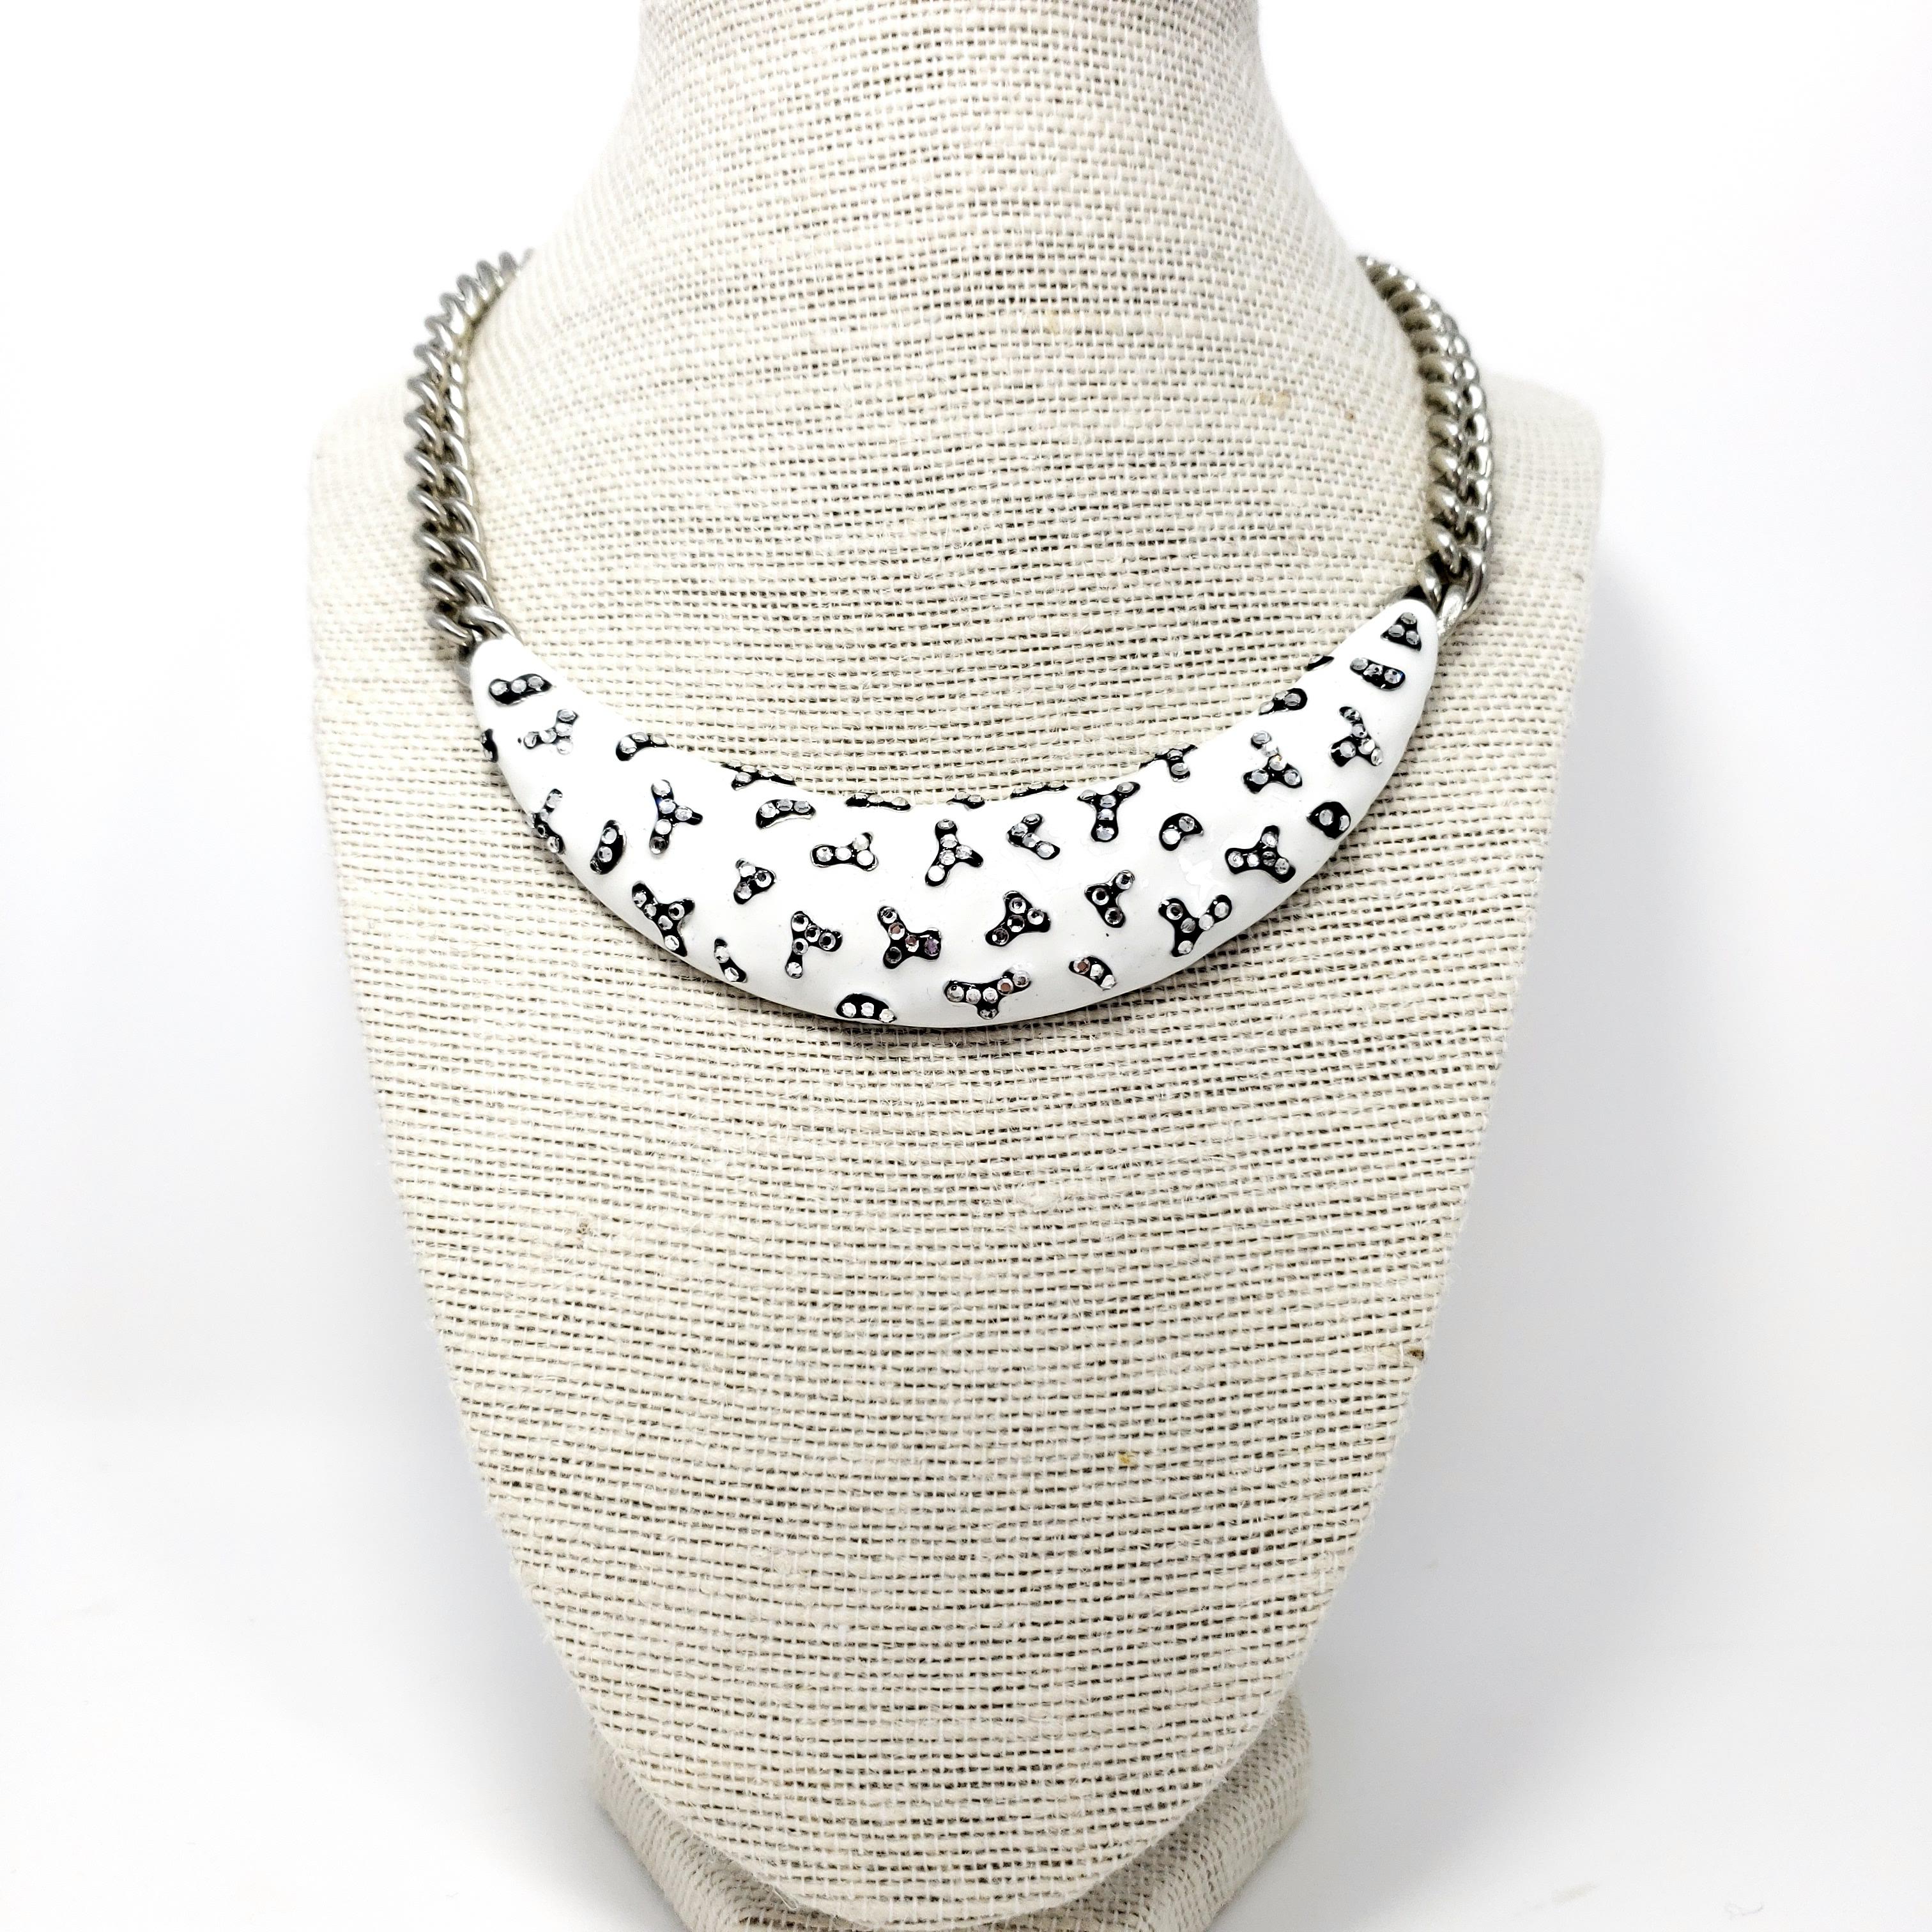 Embellished collar necklace, featuring a white and black enamel centerpiece accented with clear crystals. Silver-tone chain. From Kenneth Jay Lane.

Length: 42 cm + 9.5 cm extension

Hallmarks: Kenneth Lane